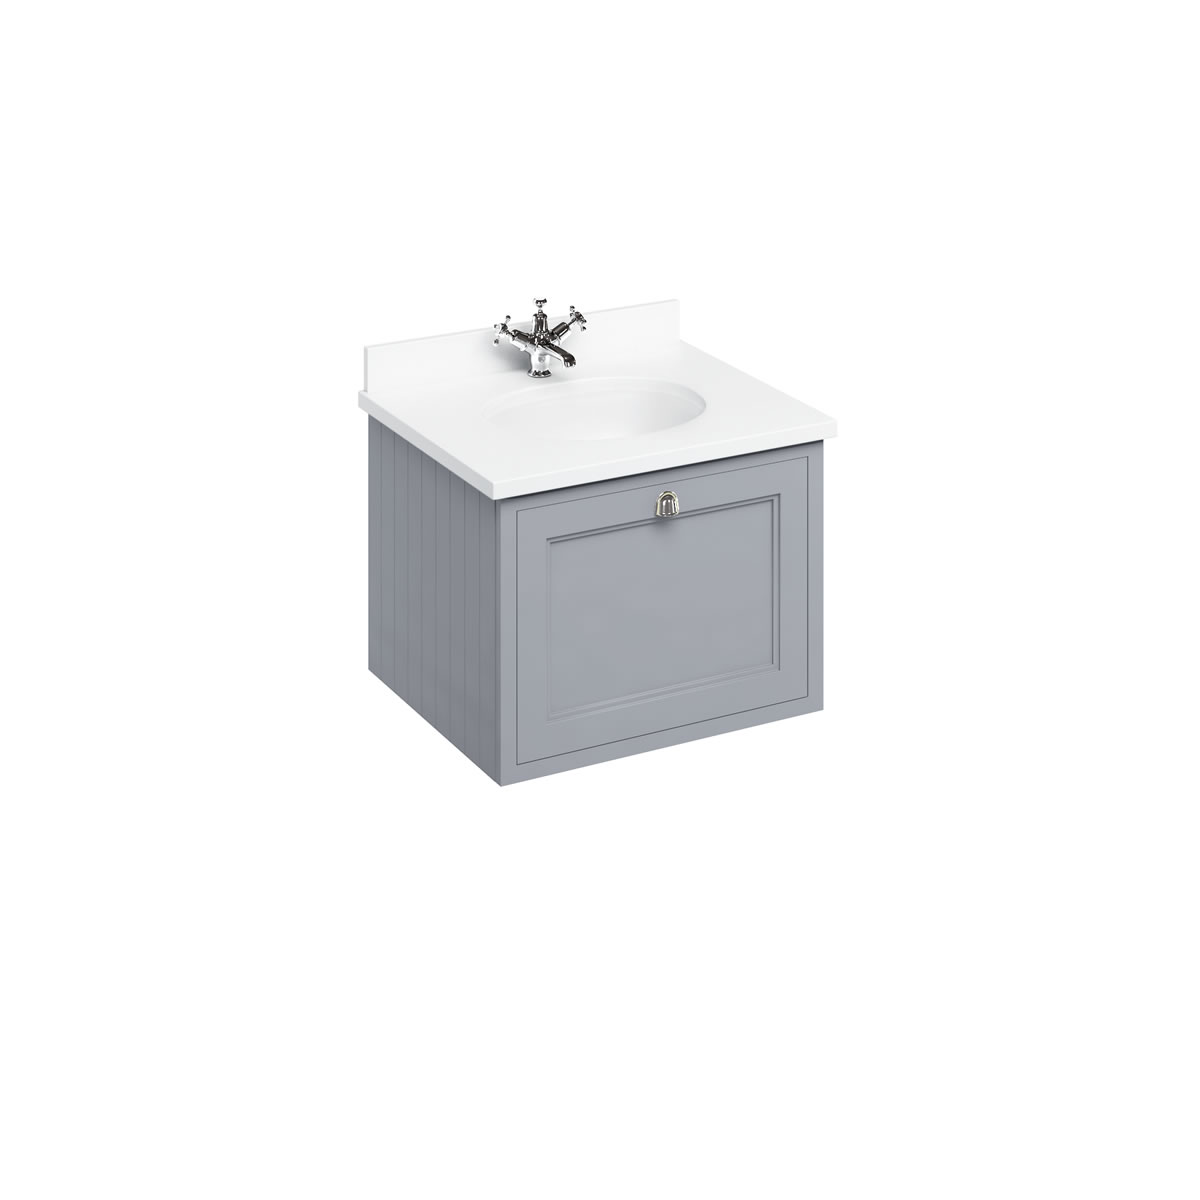 Wall Hung 65 Vanity Unit single drawer - Classic Grey and Minerva white worktop with integrated white basin 